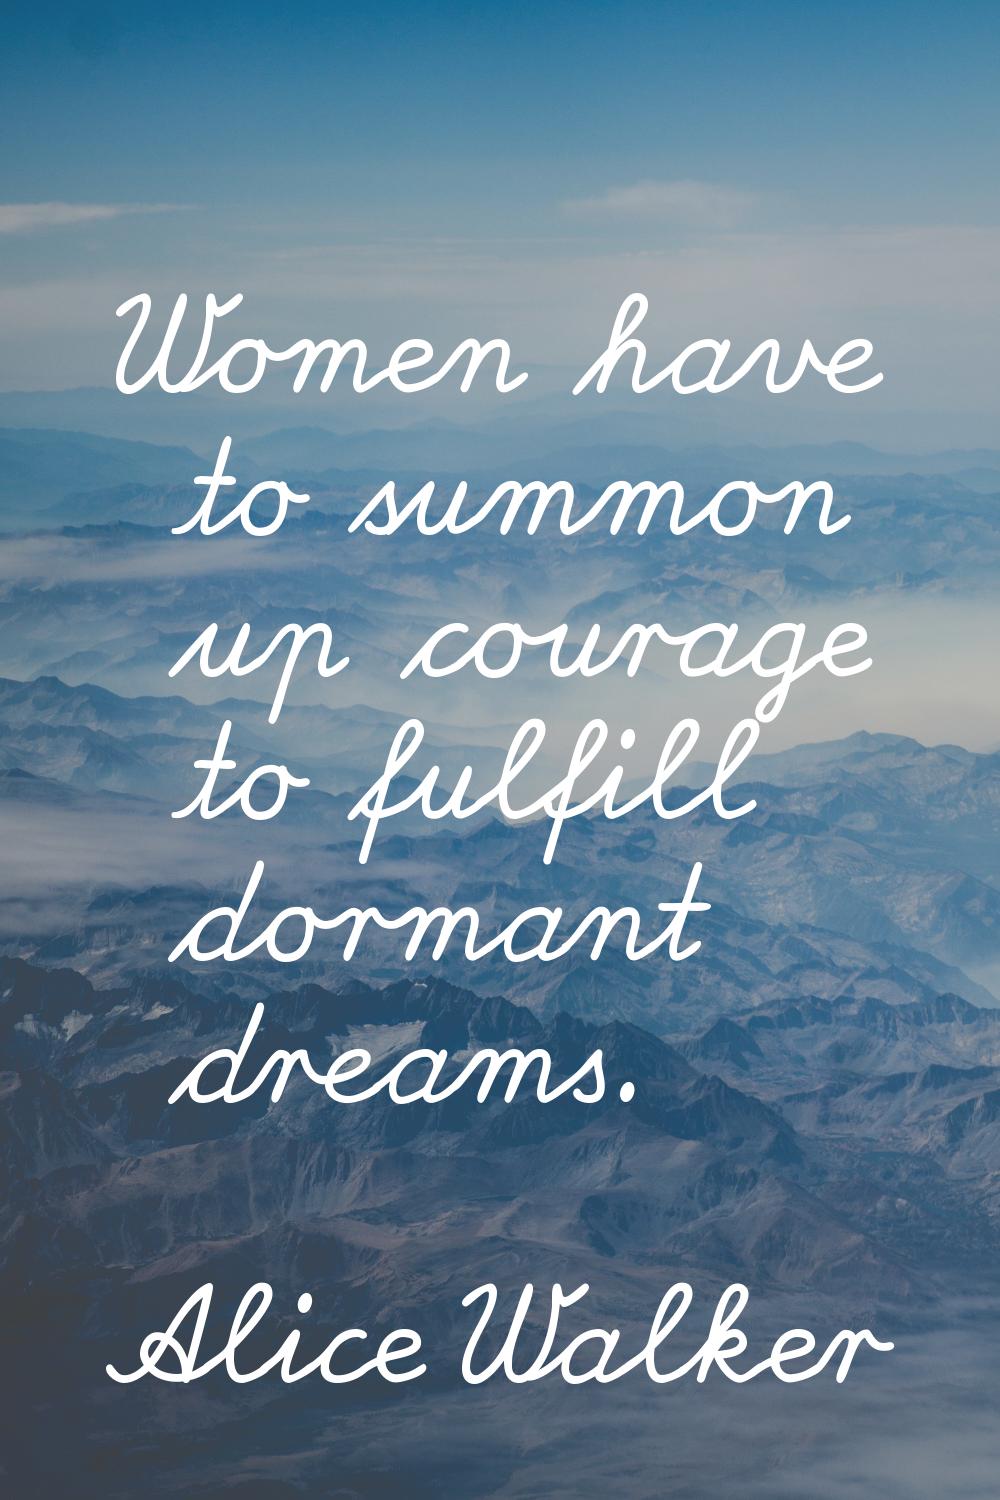 Women have to summon up courage to fulfill dormant dreams.